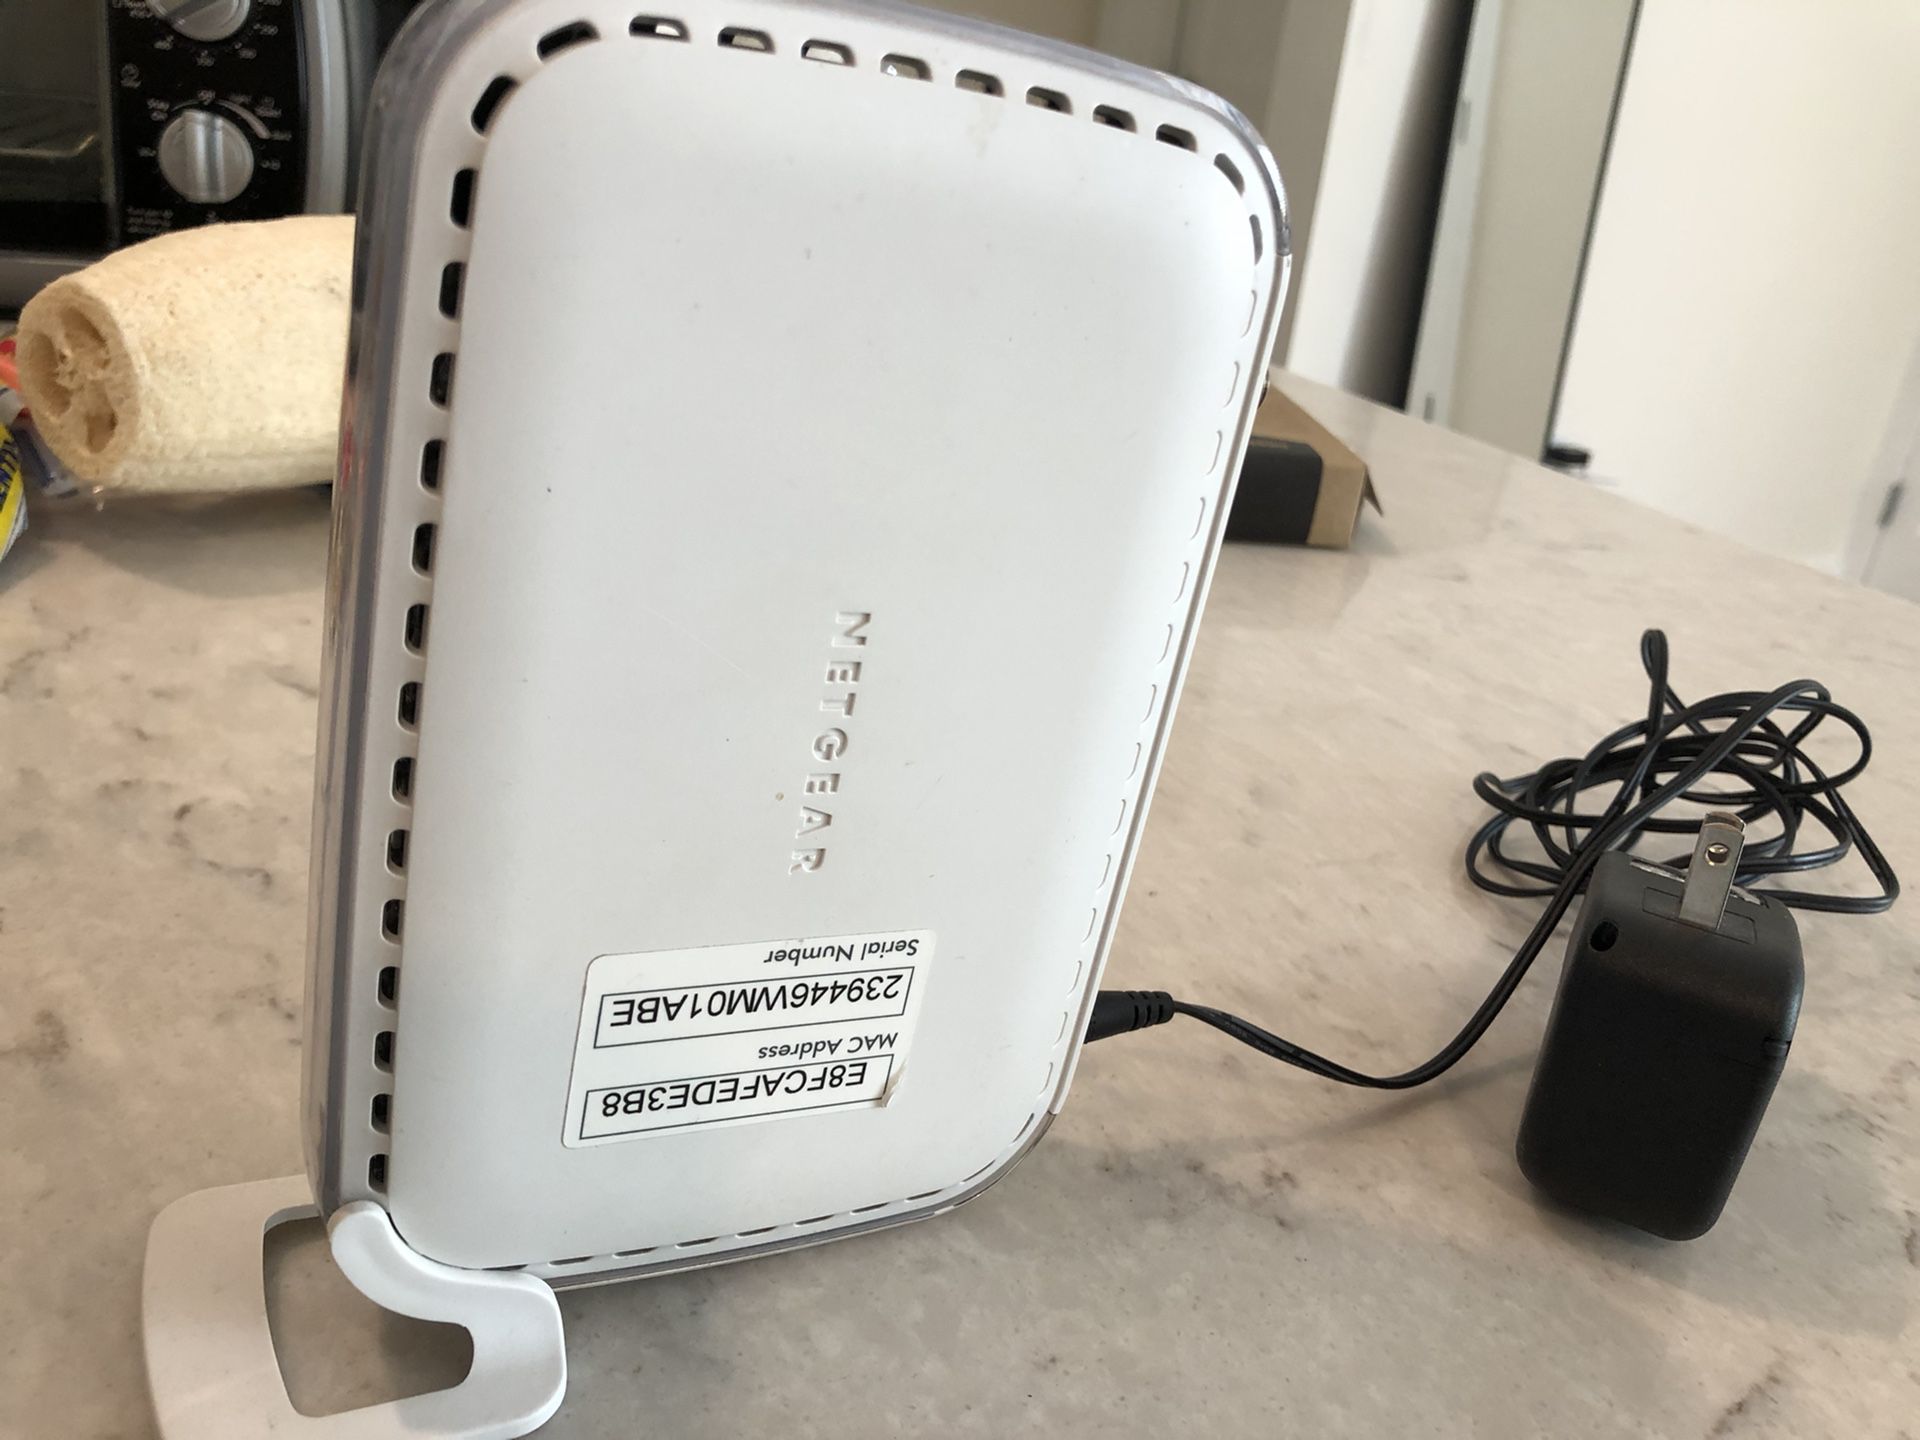 AC750 dual band WiFi router and Netgear CMD31T modem Combo $30 Router $15 Modem $20